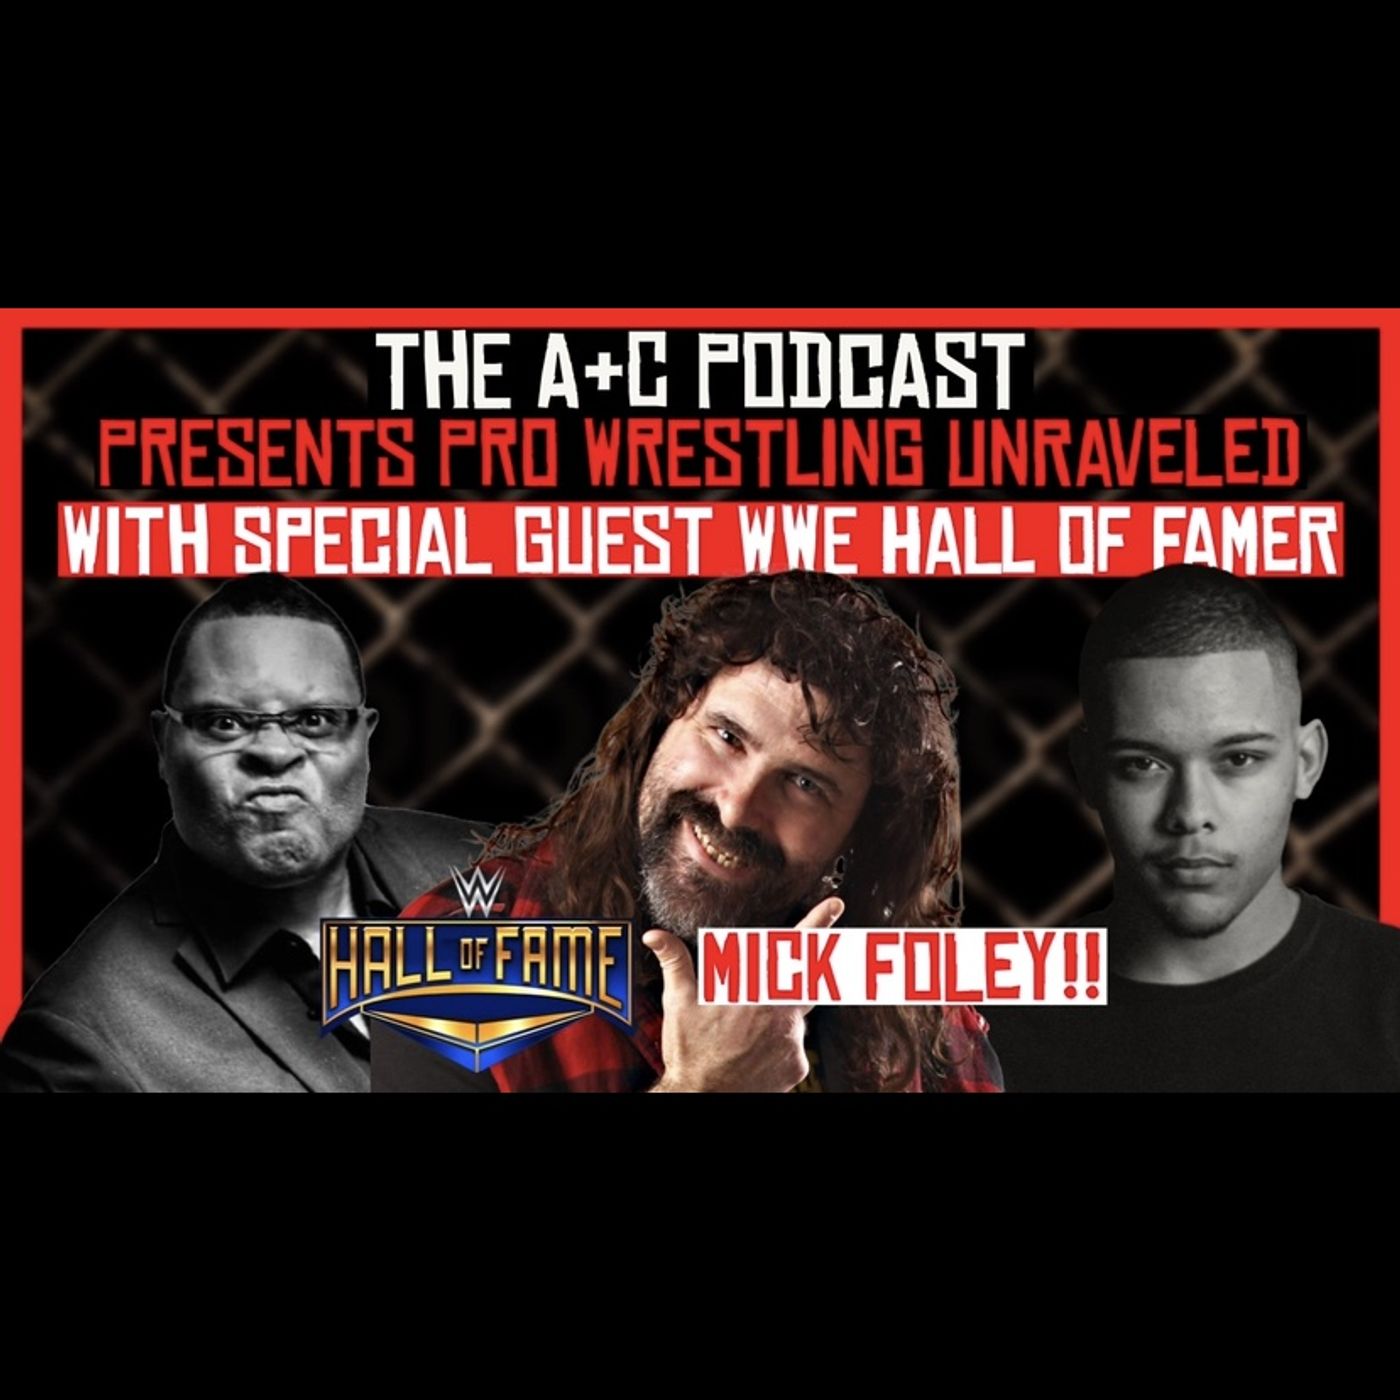 WWE Hall of Famer Mick Foley! Watch as He Surprises The Host of Autism Rocks and rolls Sam Mitchell!